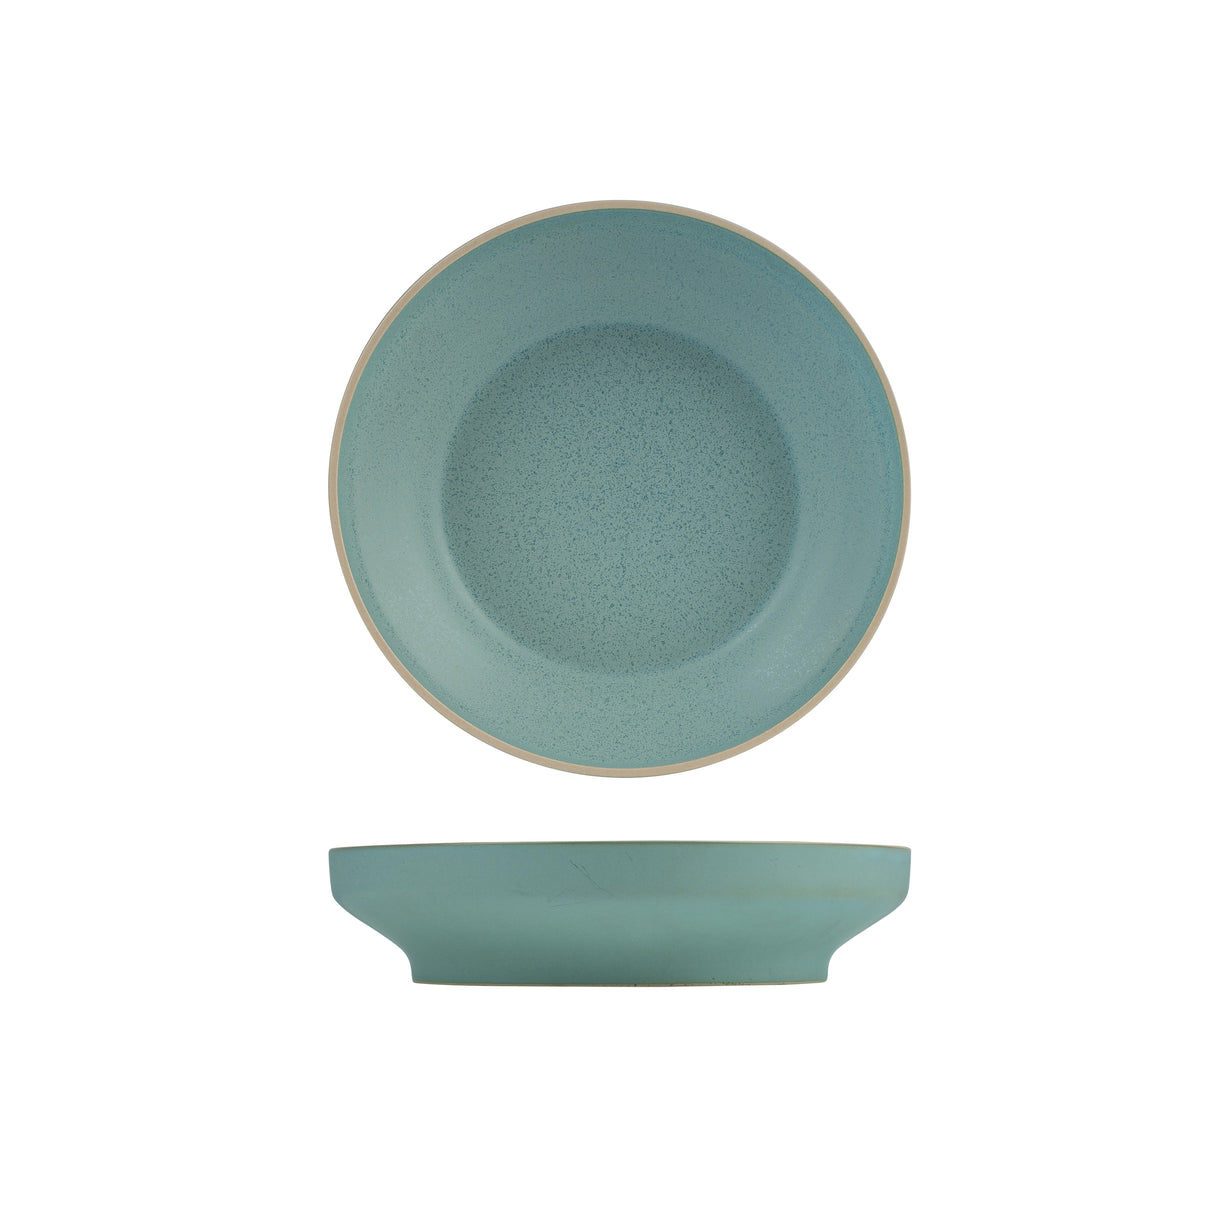 Share Bowl - 260Mm, frosted blue: Pack of 4